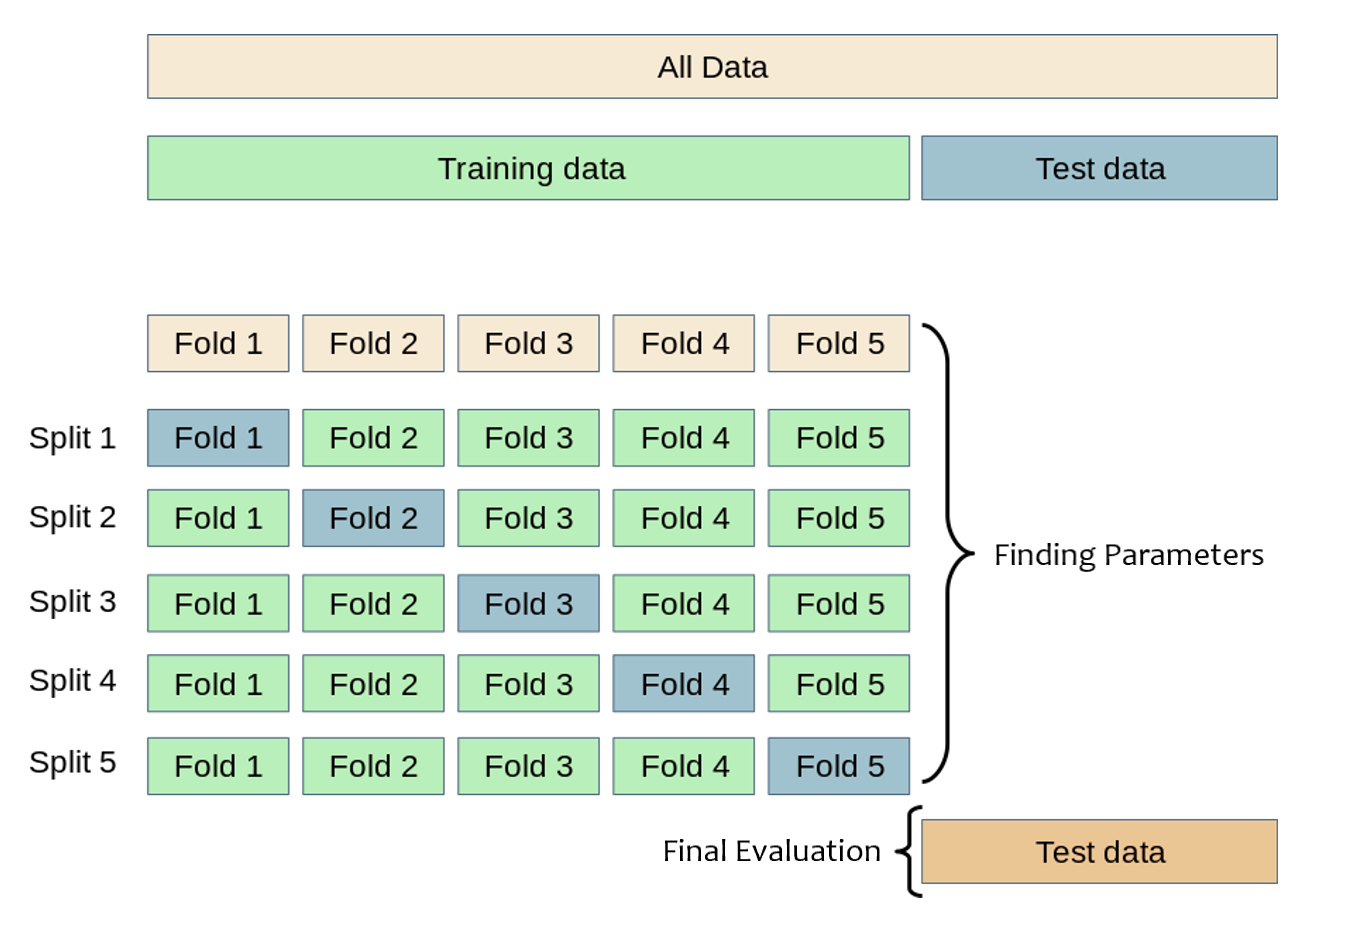 Schematic representation of k-fold cross-validation ($k=5$). The training set is split into $k$ smaller sets. The model is trained using $k-1$ folds and validated on the remaining data. The best model is evaluated in the holdout test set. Modified from scikit documentation.